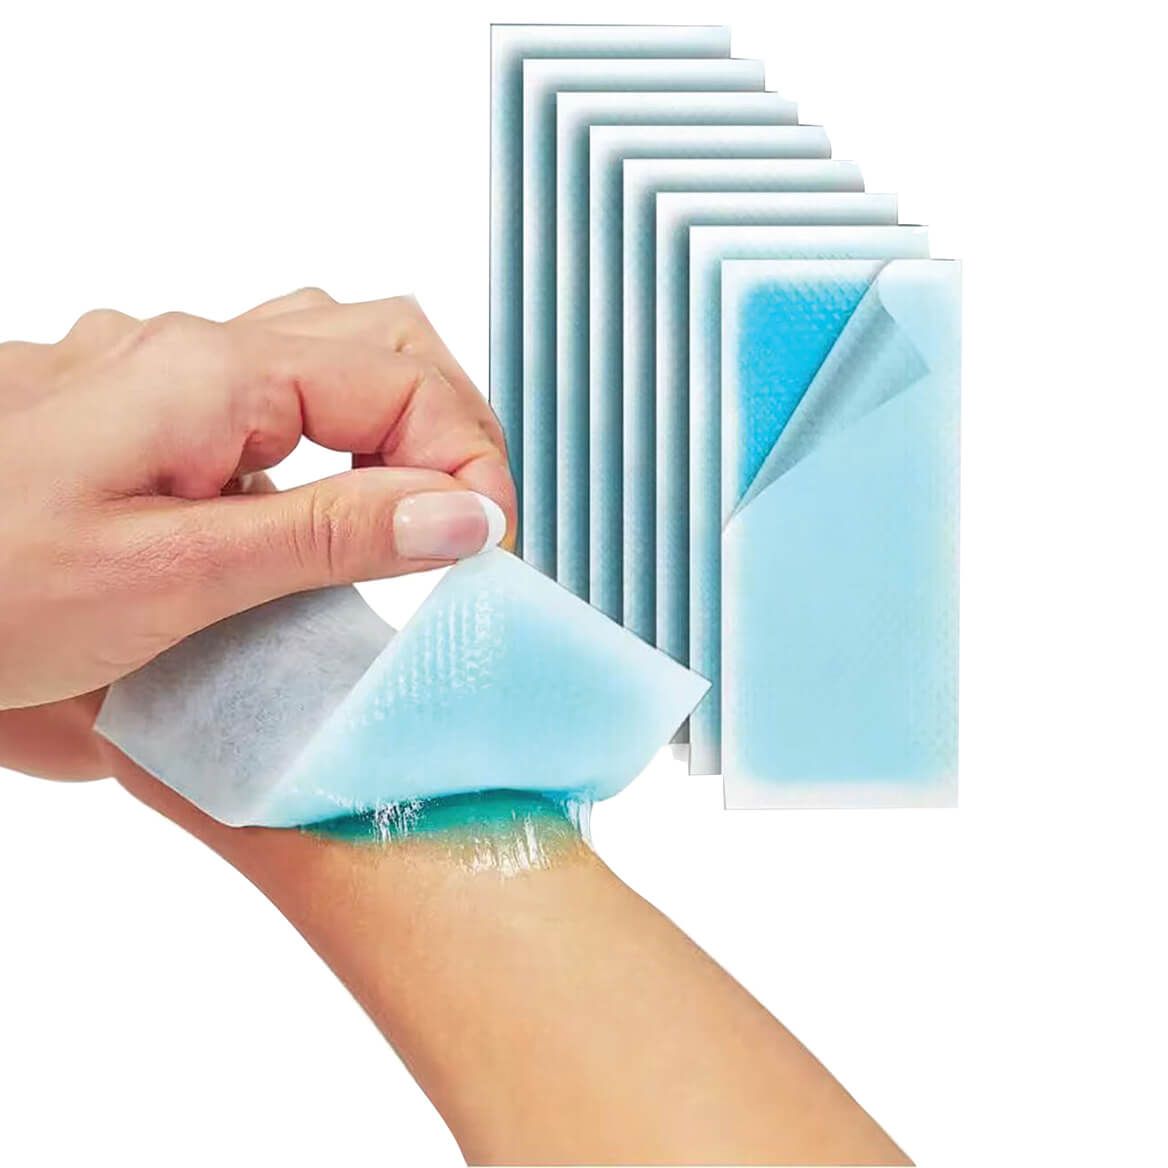 Cooling Pain Relief Patches, Set of 8 + '-' + 376945